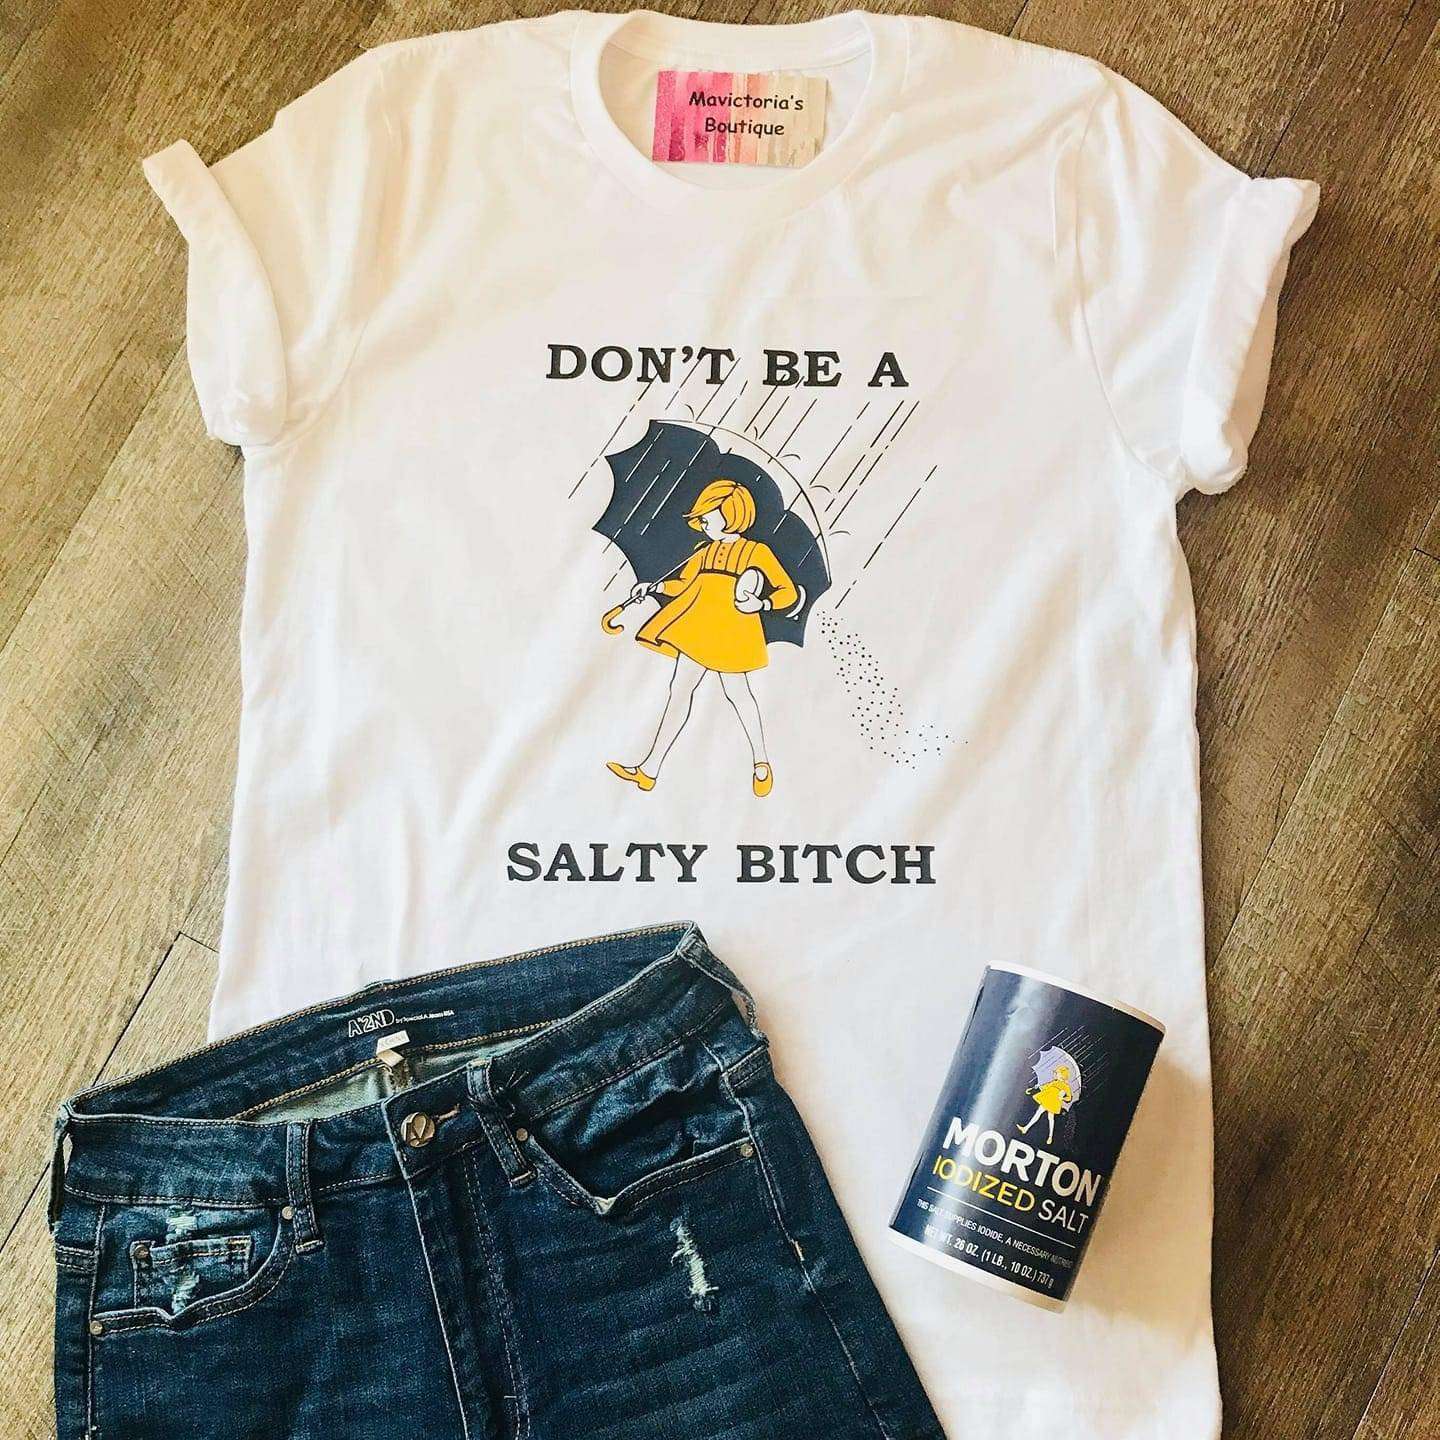 Don't be a salty bitch - Girl with umbrella, umbrella salty bitch